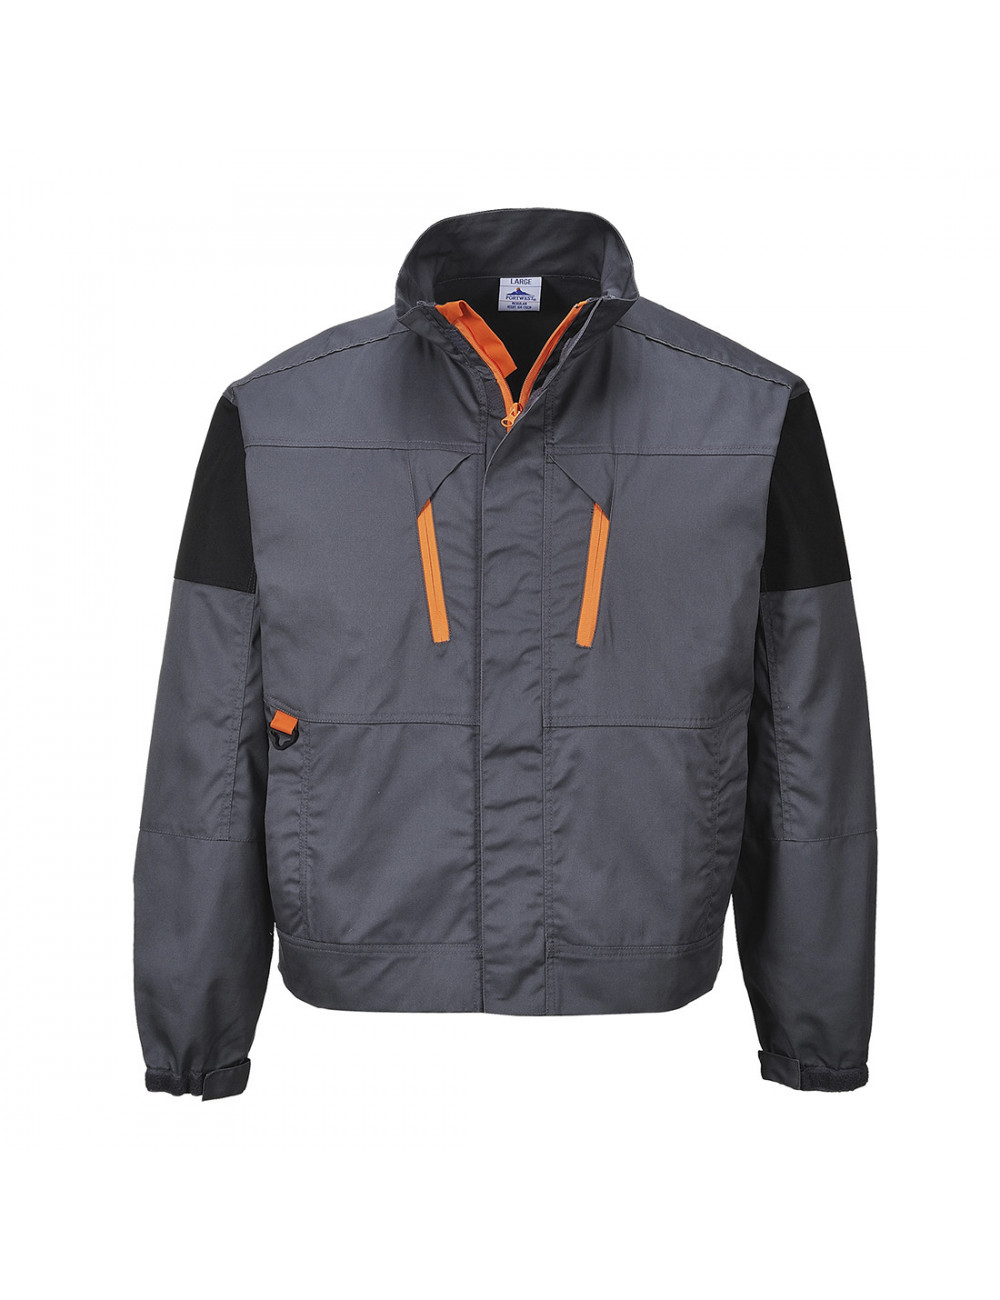 Tagus jacket charcoal gray Portwest